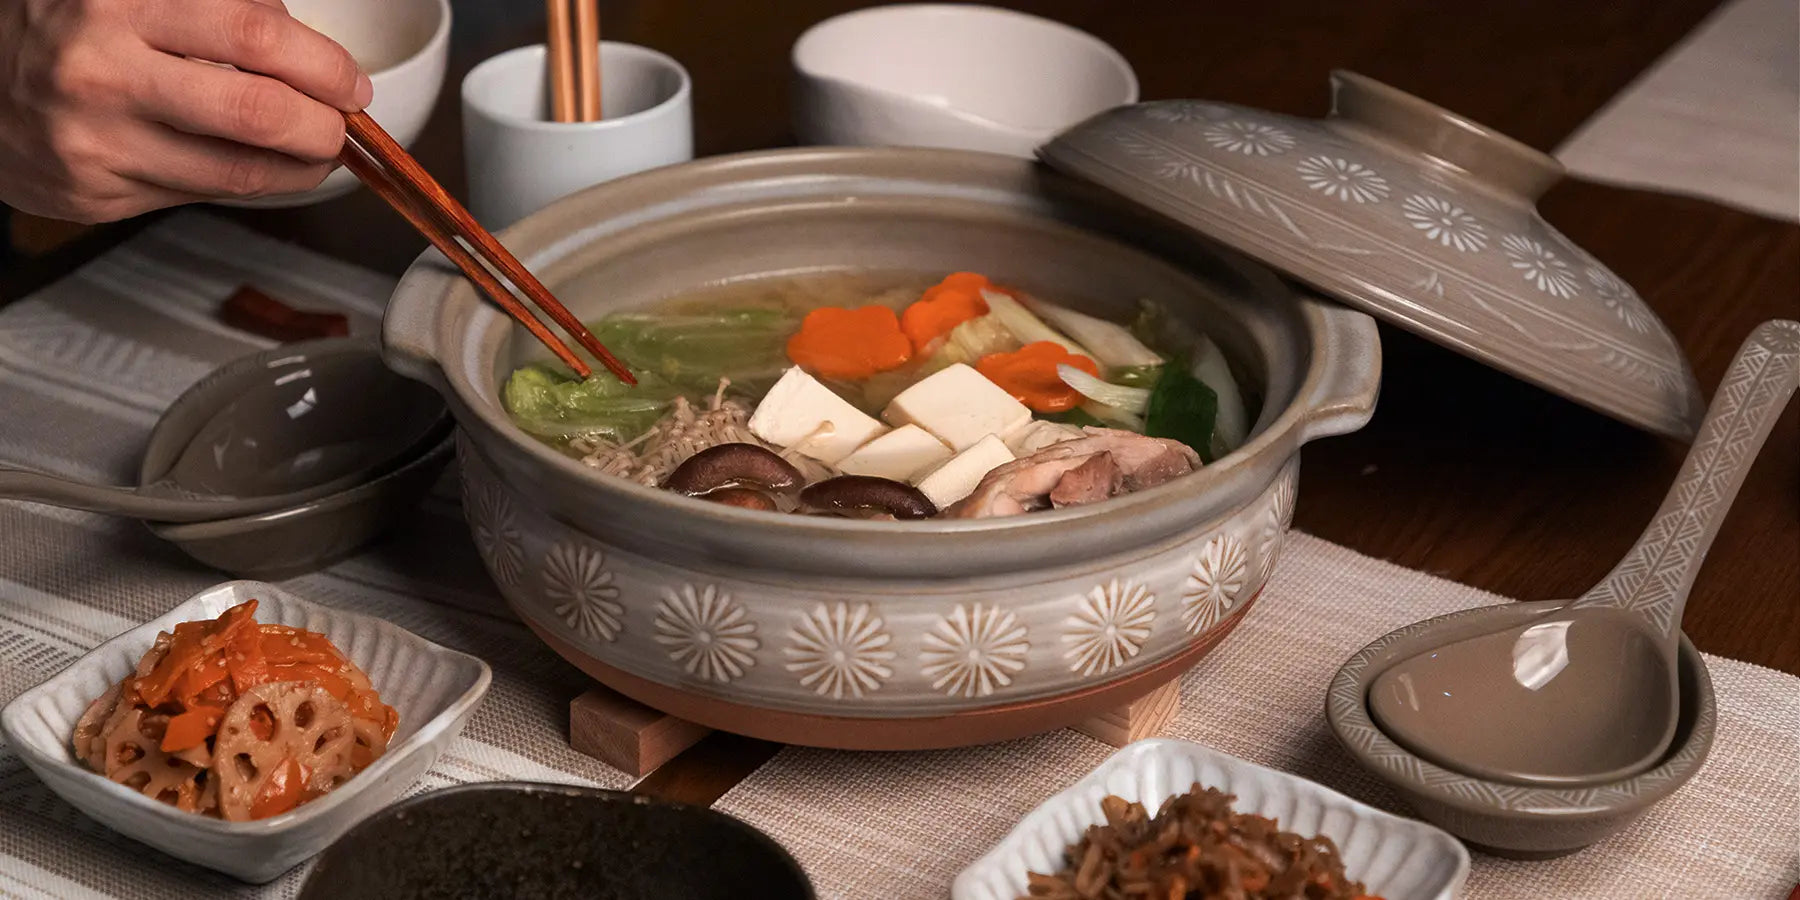 Discover our great selection of Casserole Dishes at Globalkitchen Japan.